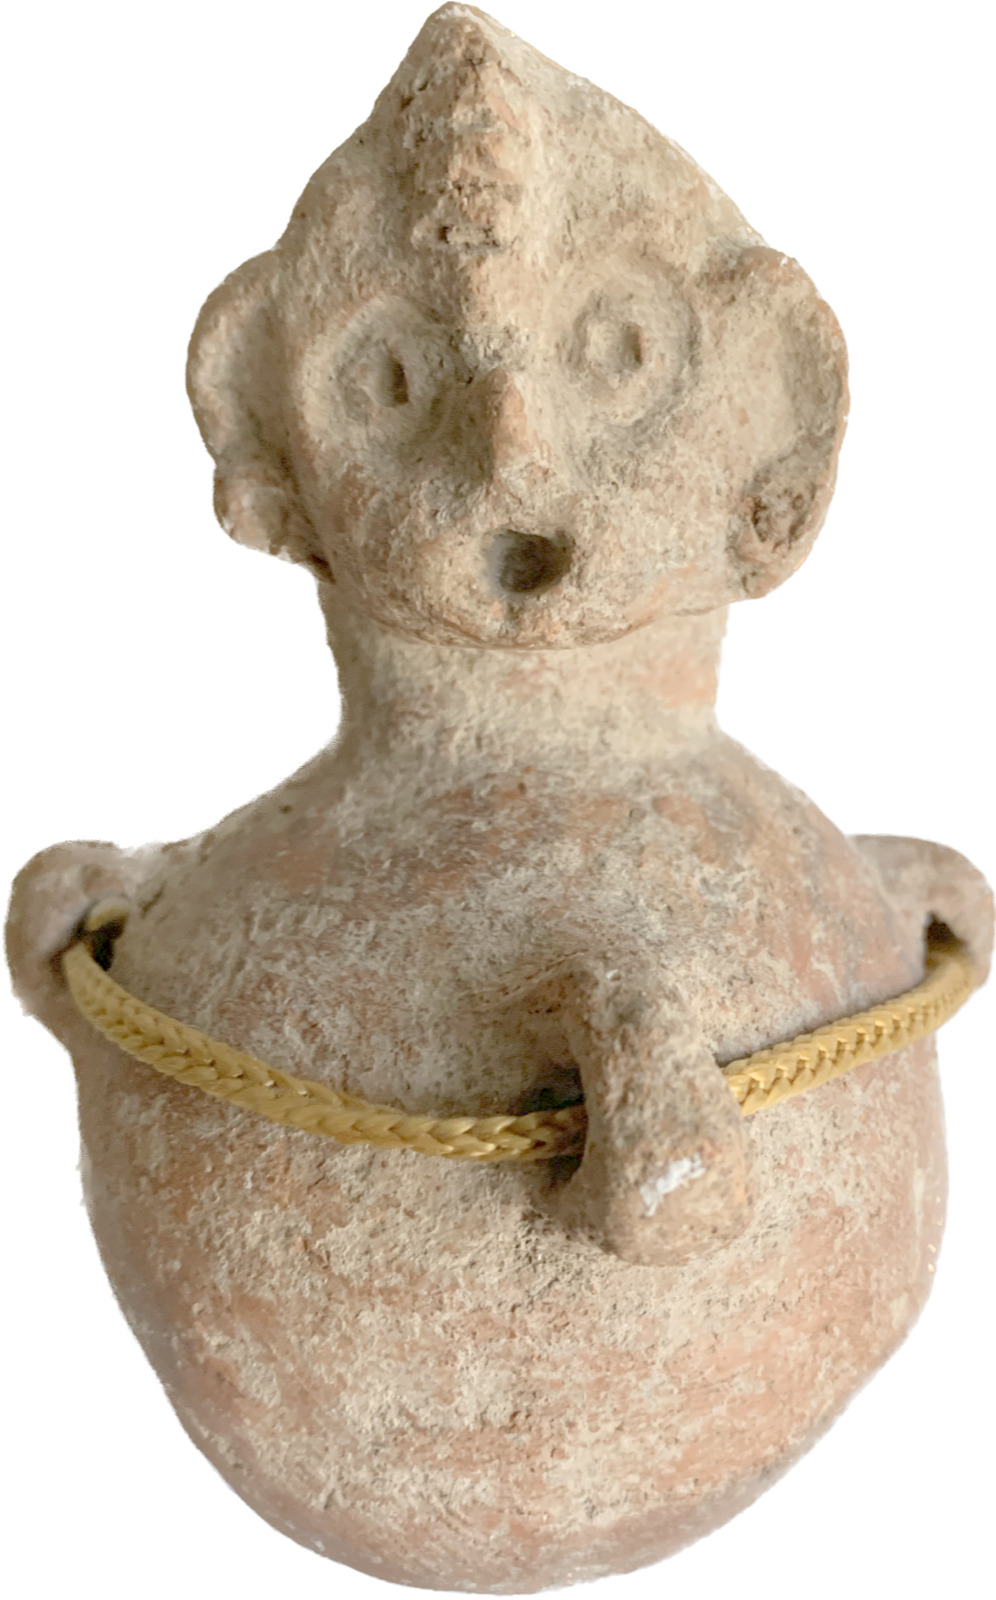 Pre-Columbia Pottery Figure of Teotihaucan Origin. Carrying Vessel on Back.